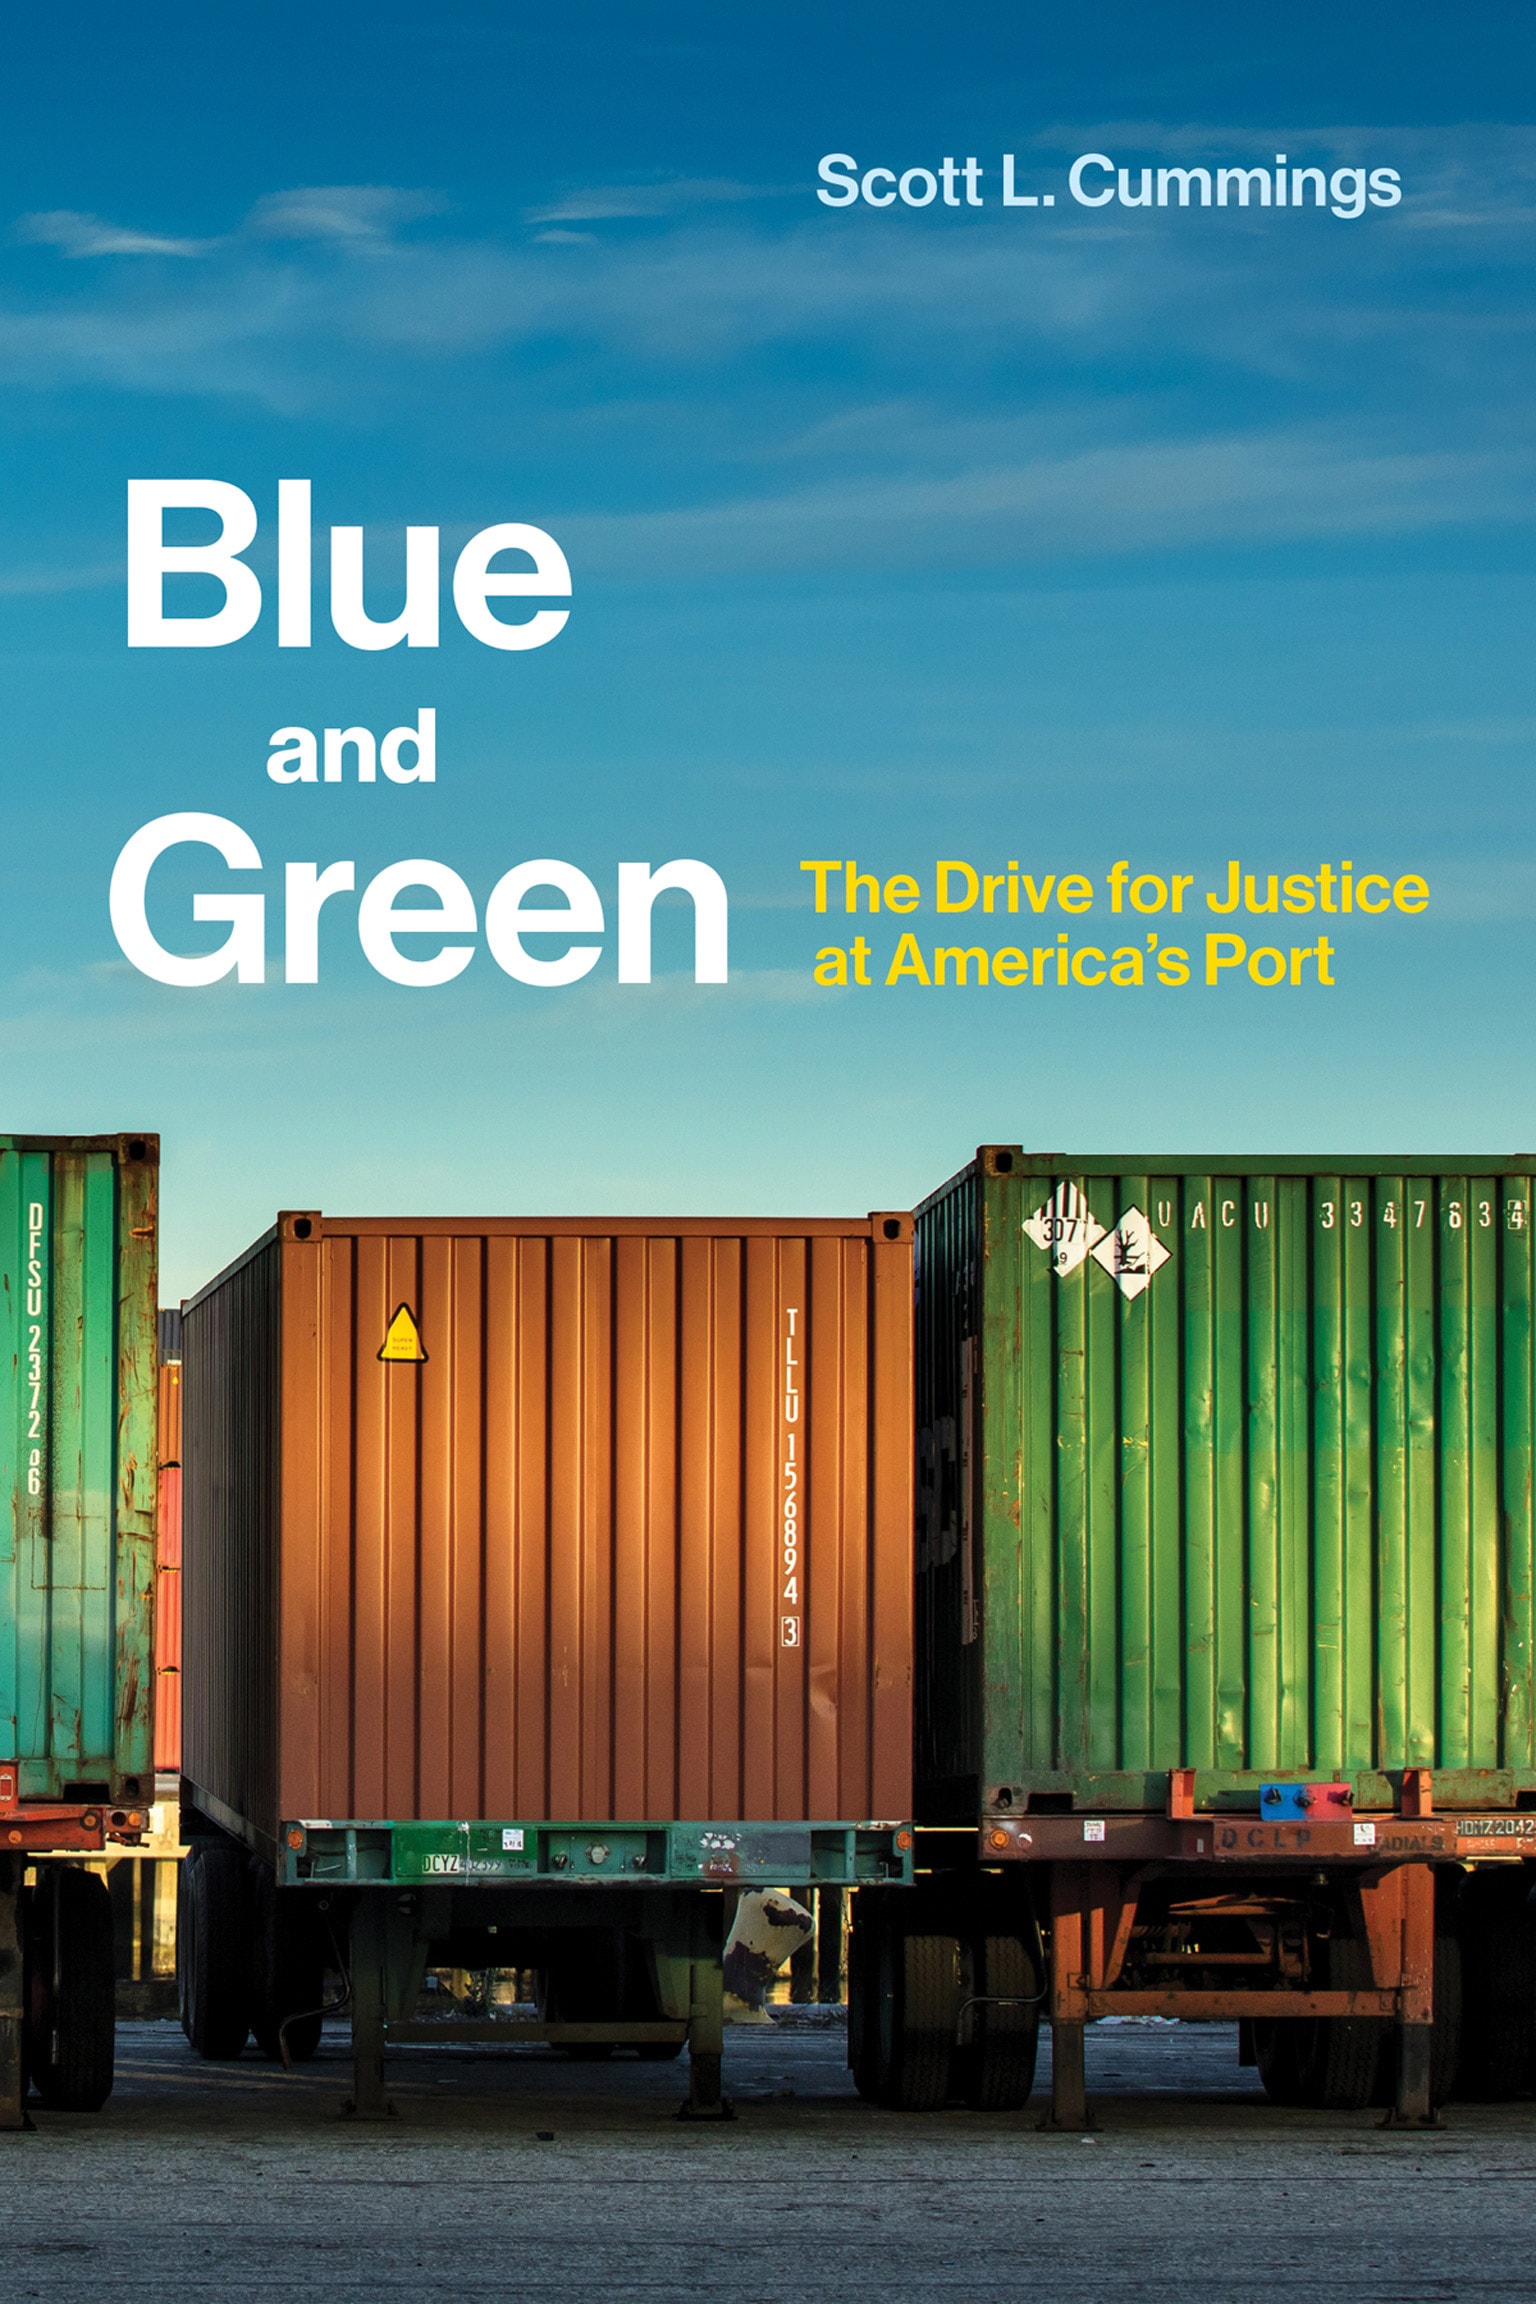 Blue and Green: The Drive for Justice at America’s Port by Scott L. Cummings - legal movements and the environment